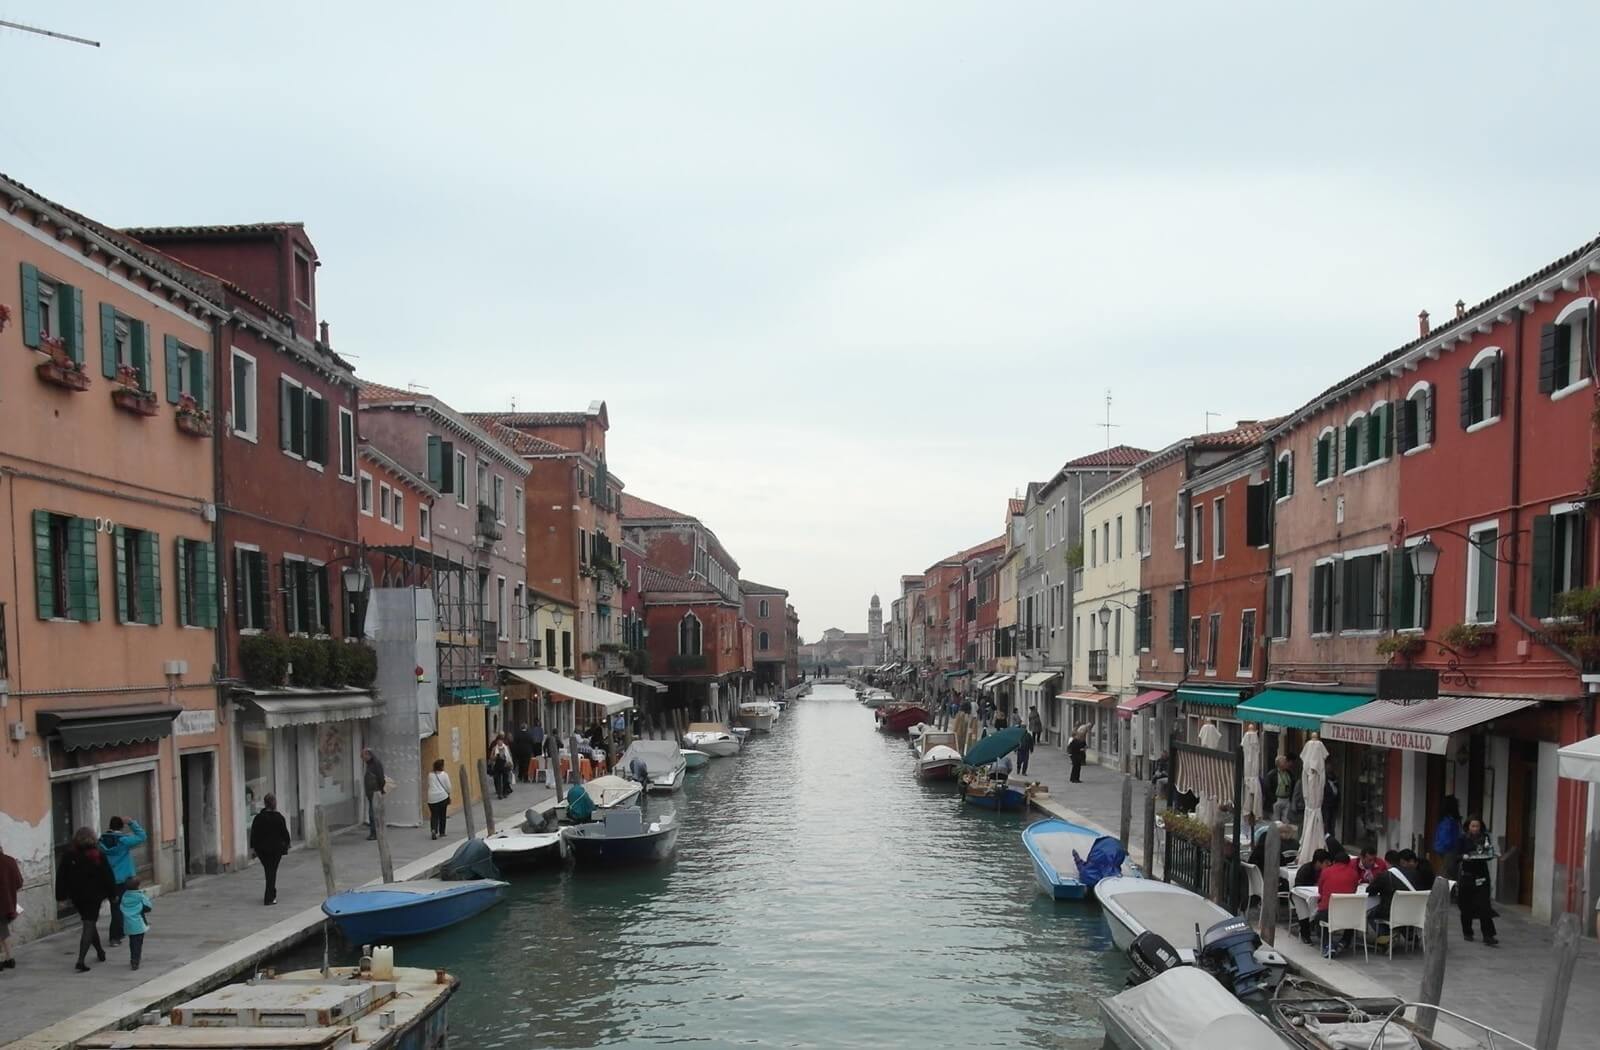 Image of Murano by Chris Mundy at the Your Web Presence Website